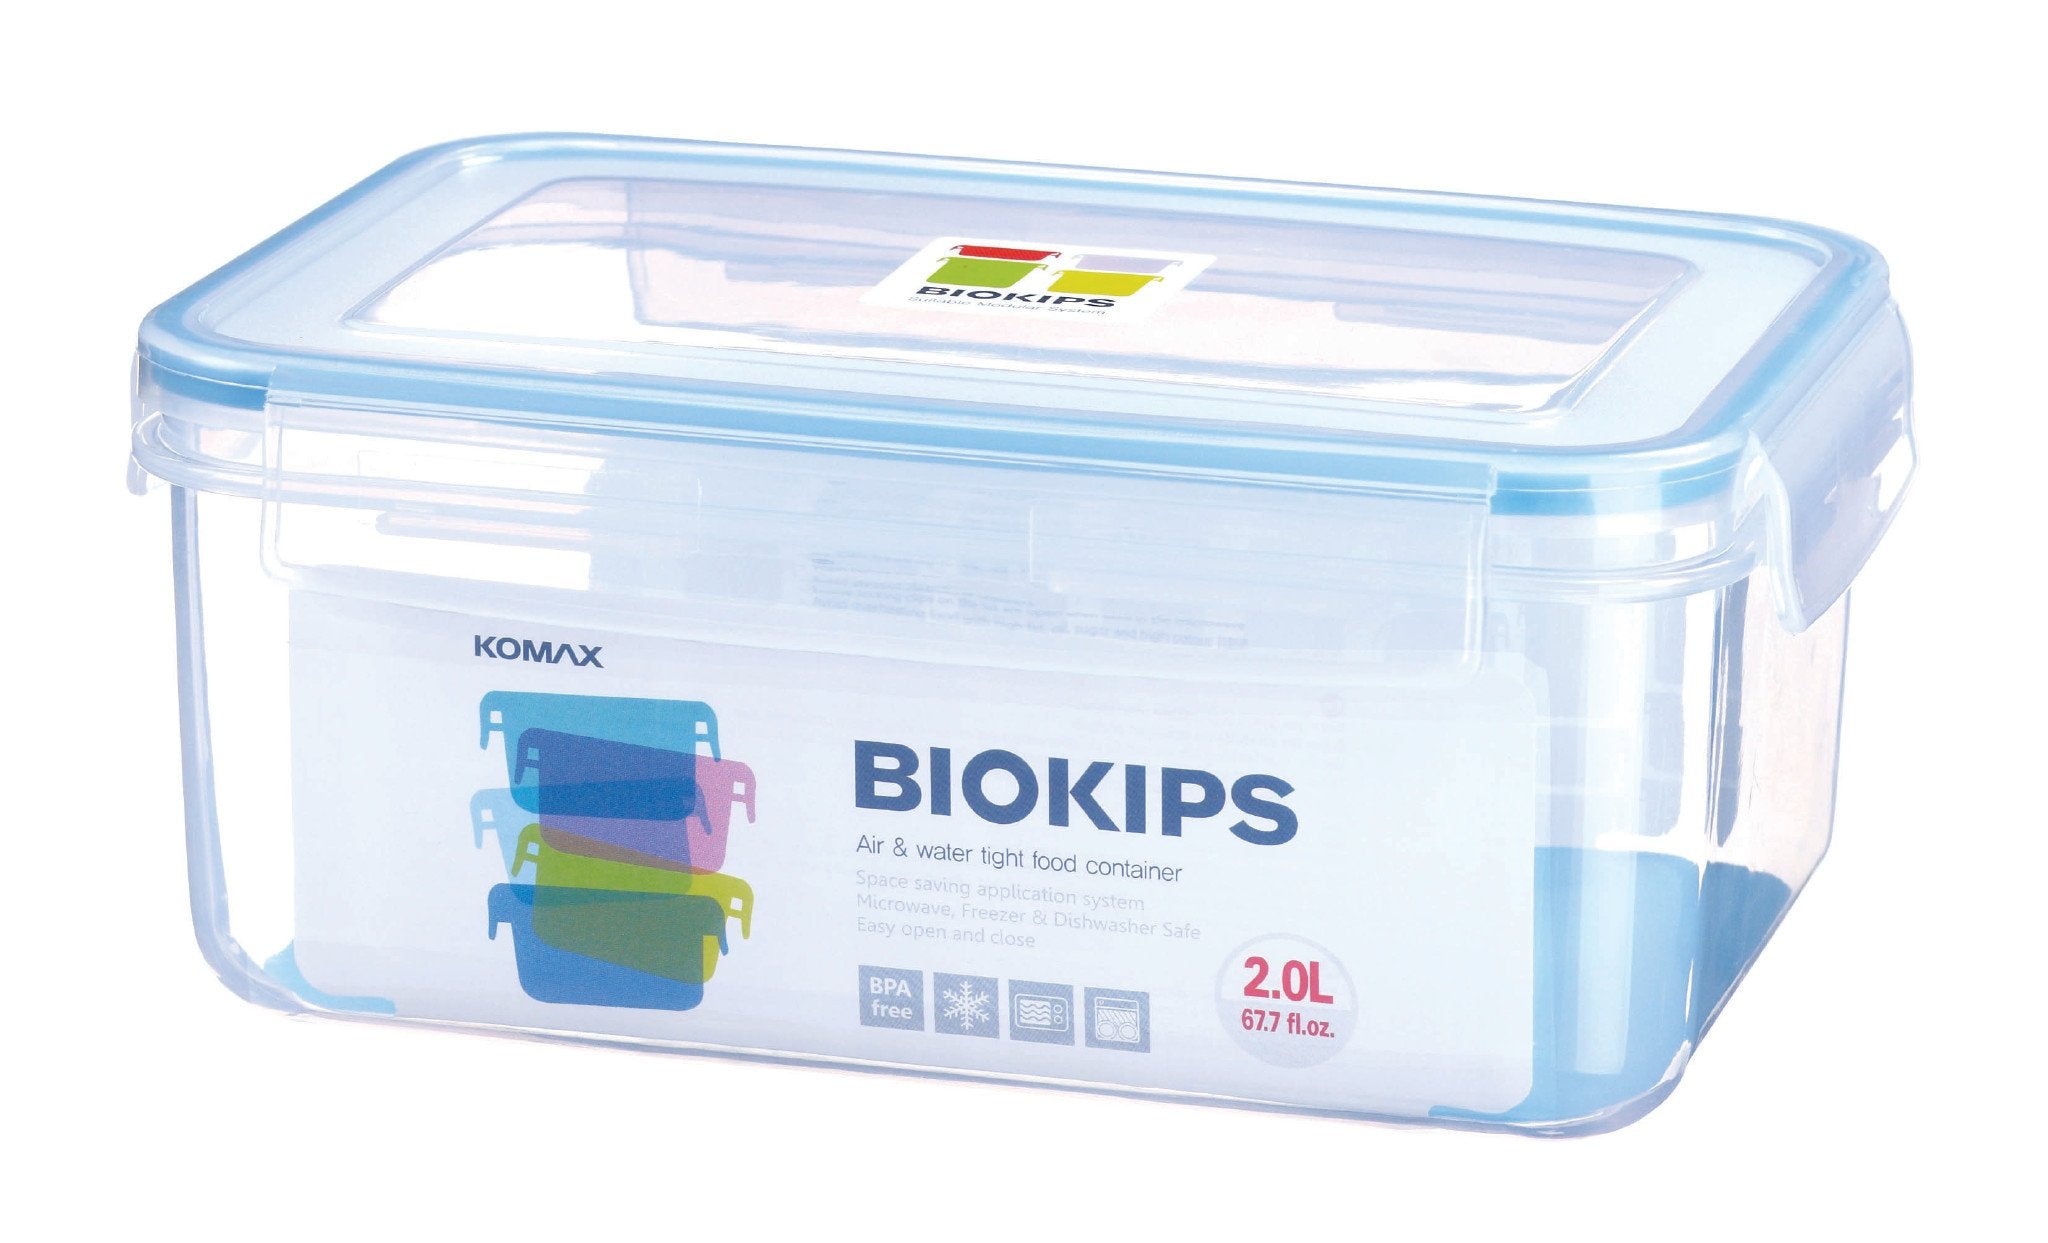 Komax Hikips Food Storage Containers for Deli Meats [2-Pack]